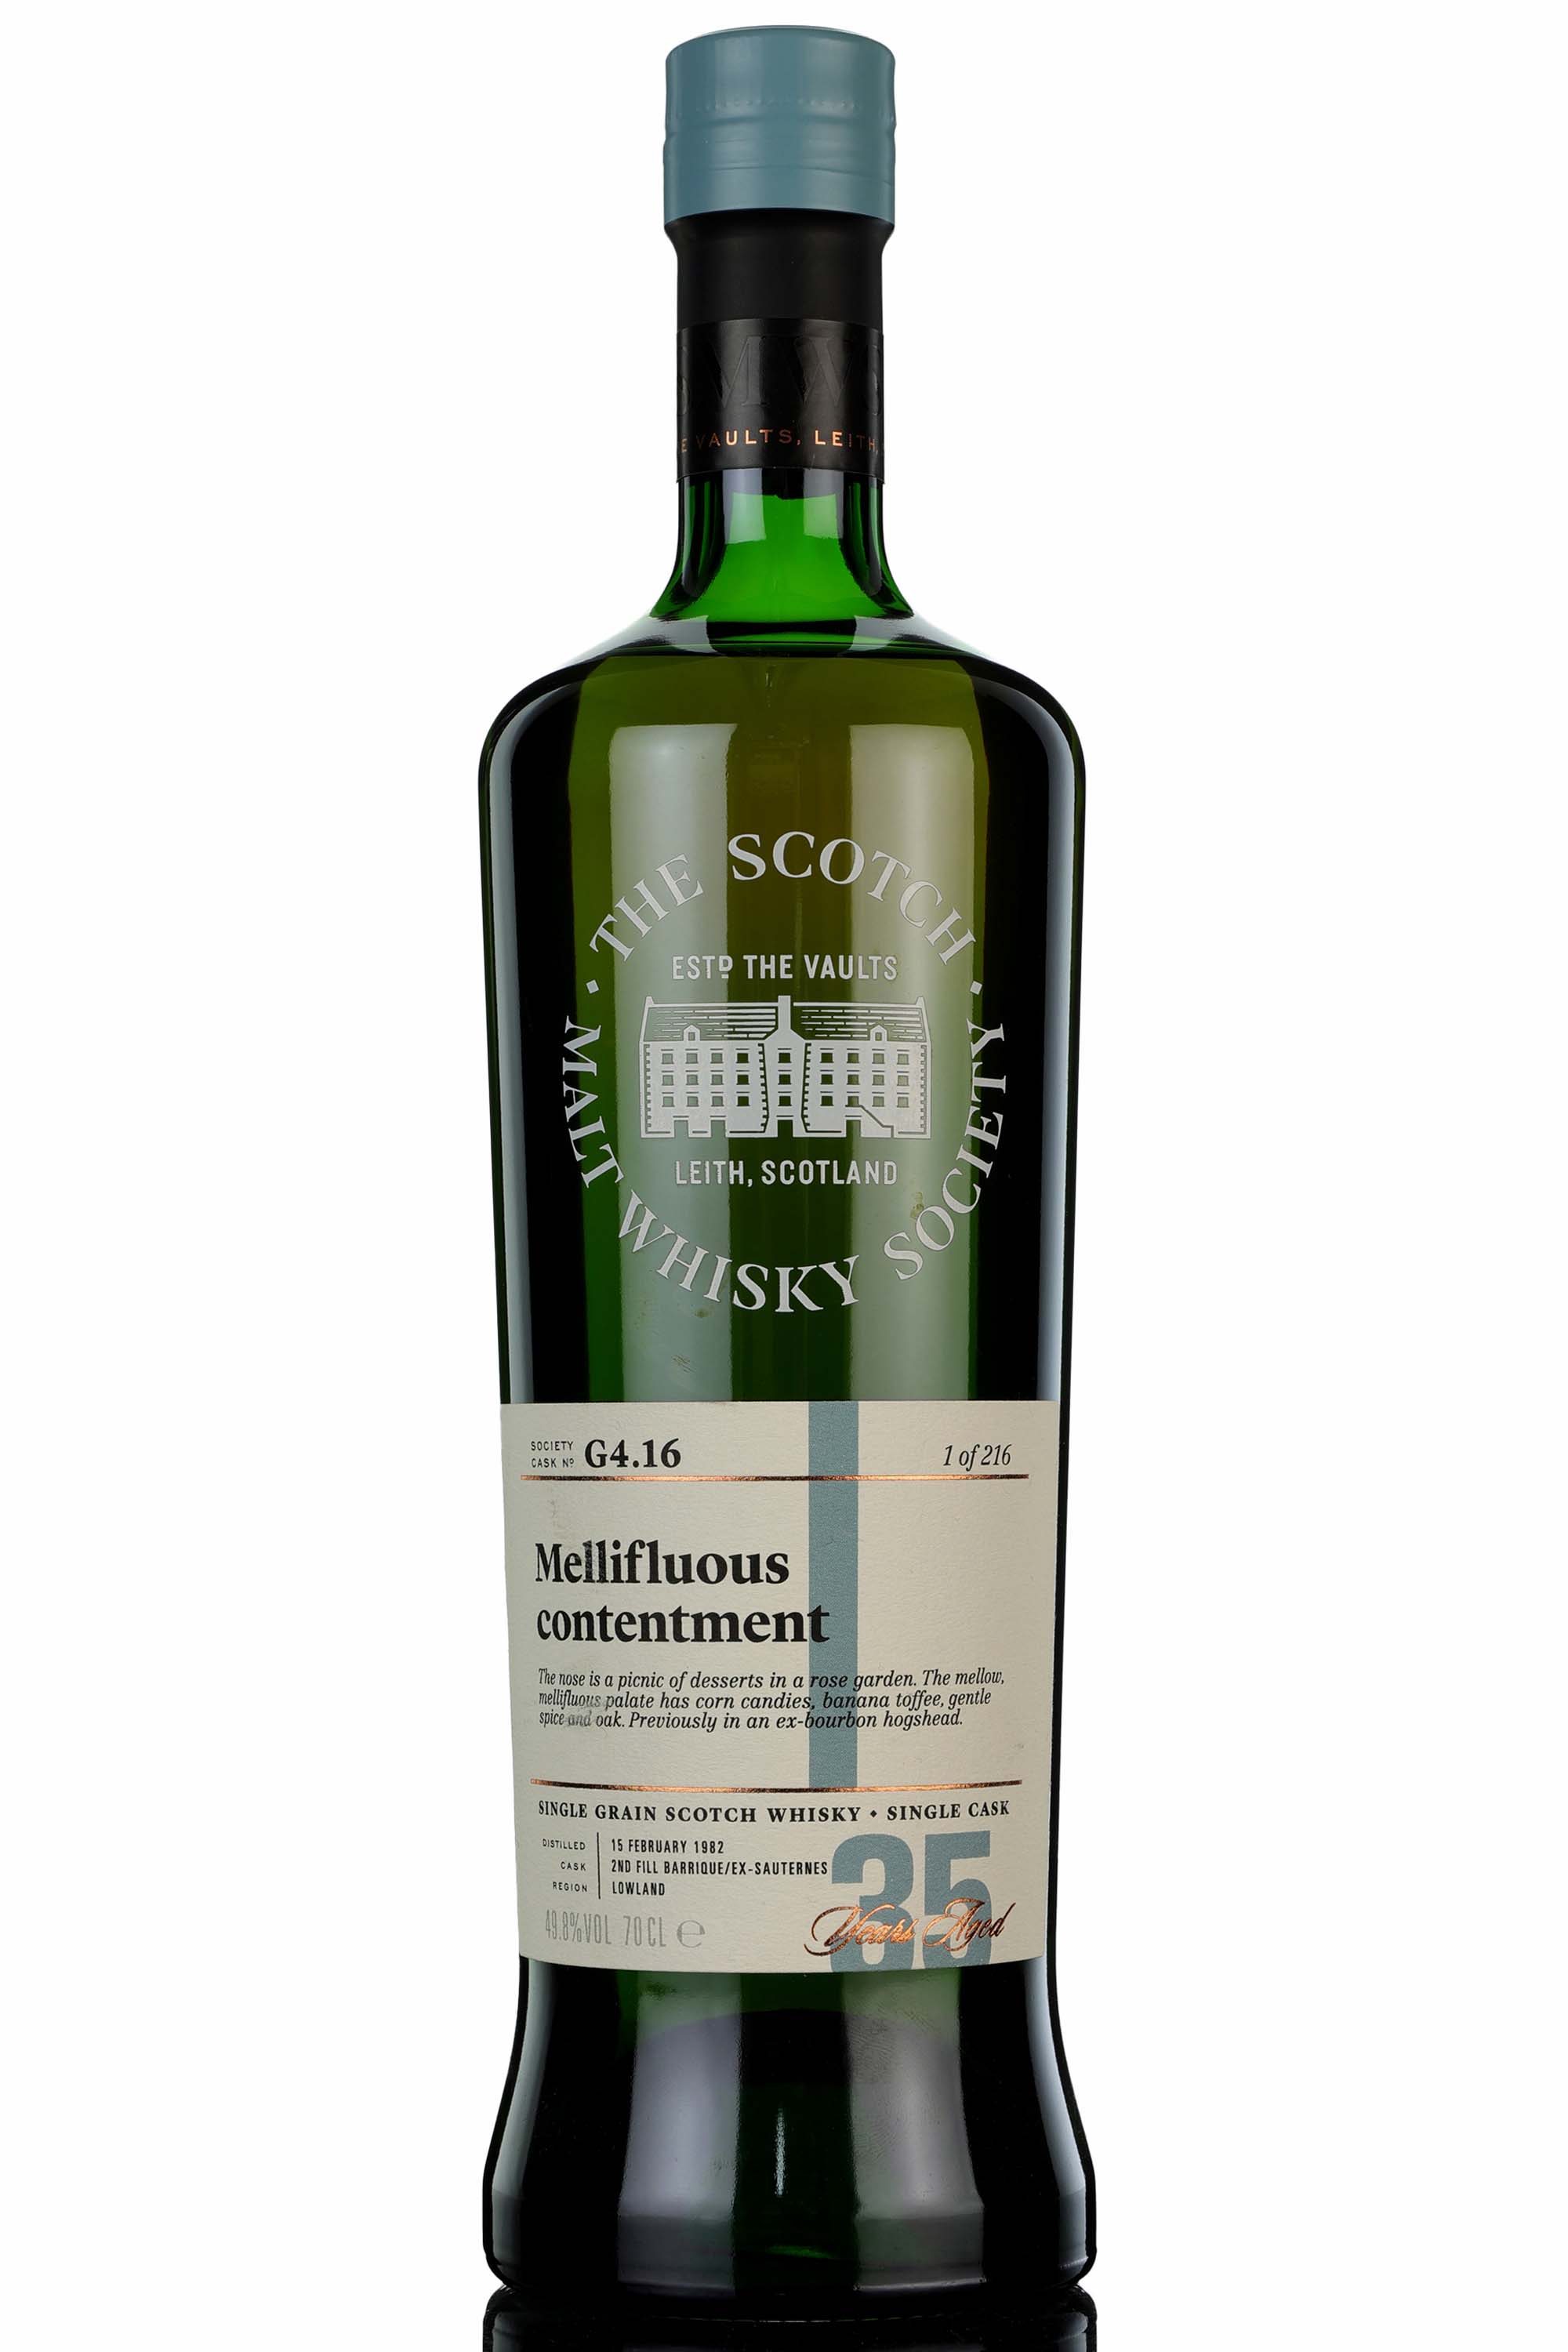 Cameronbridge 1982 - 35 Year Old - SMWS G4.16 - Mellifluous Contentment